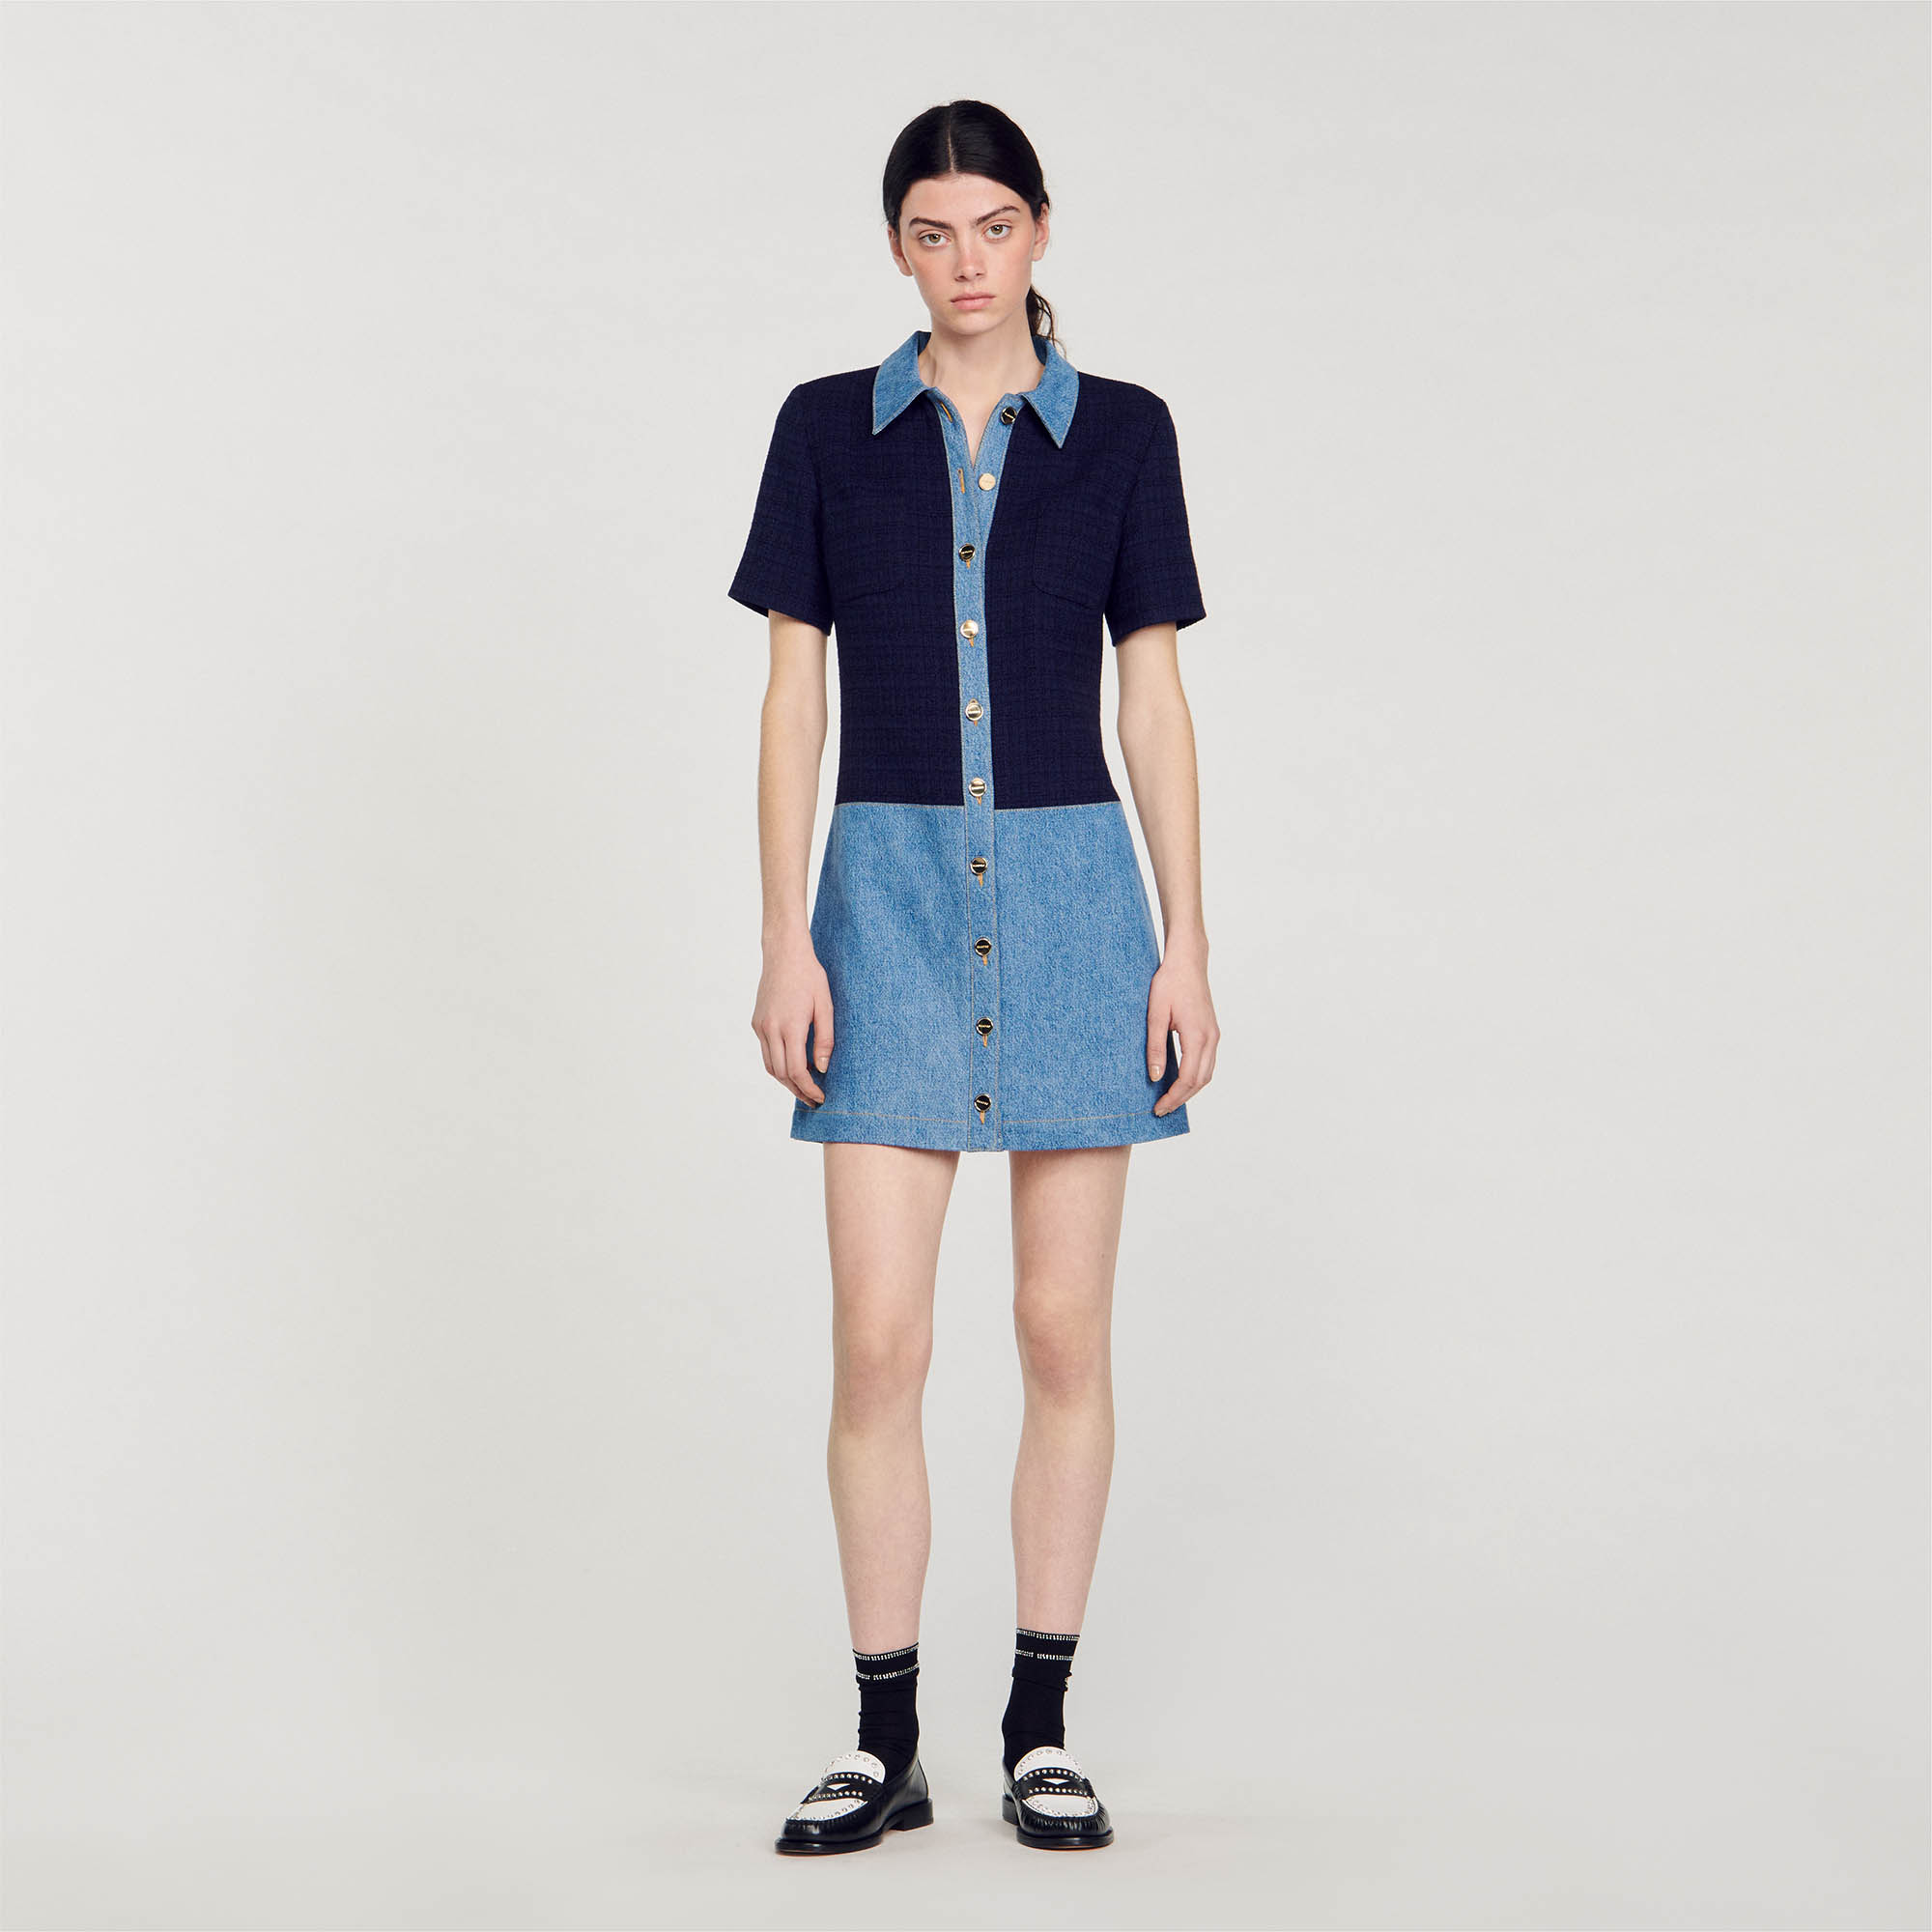 Sandro cotton Dual-material short denim and tweed dress with shirt collar, short sleeves and button fastening